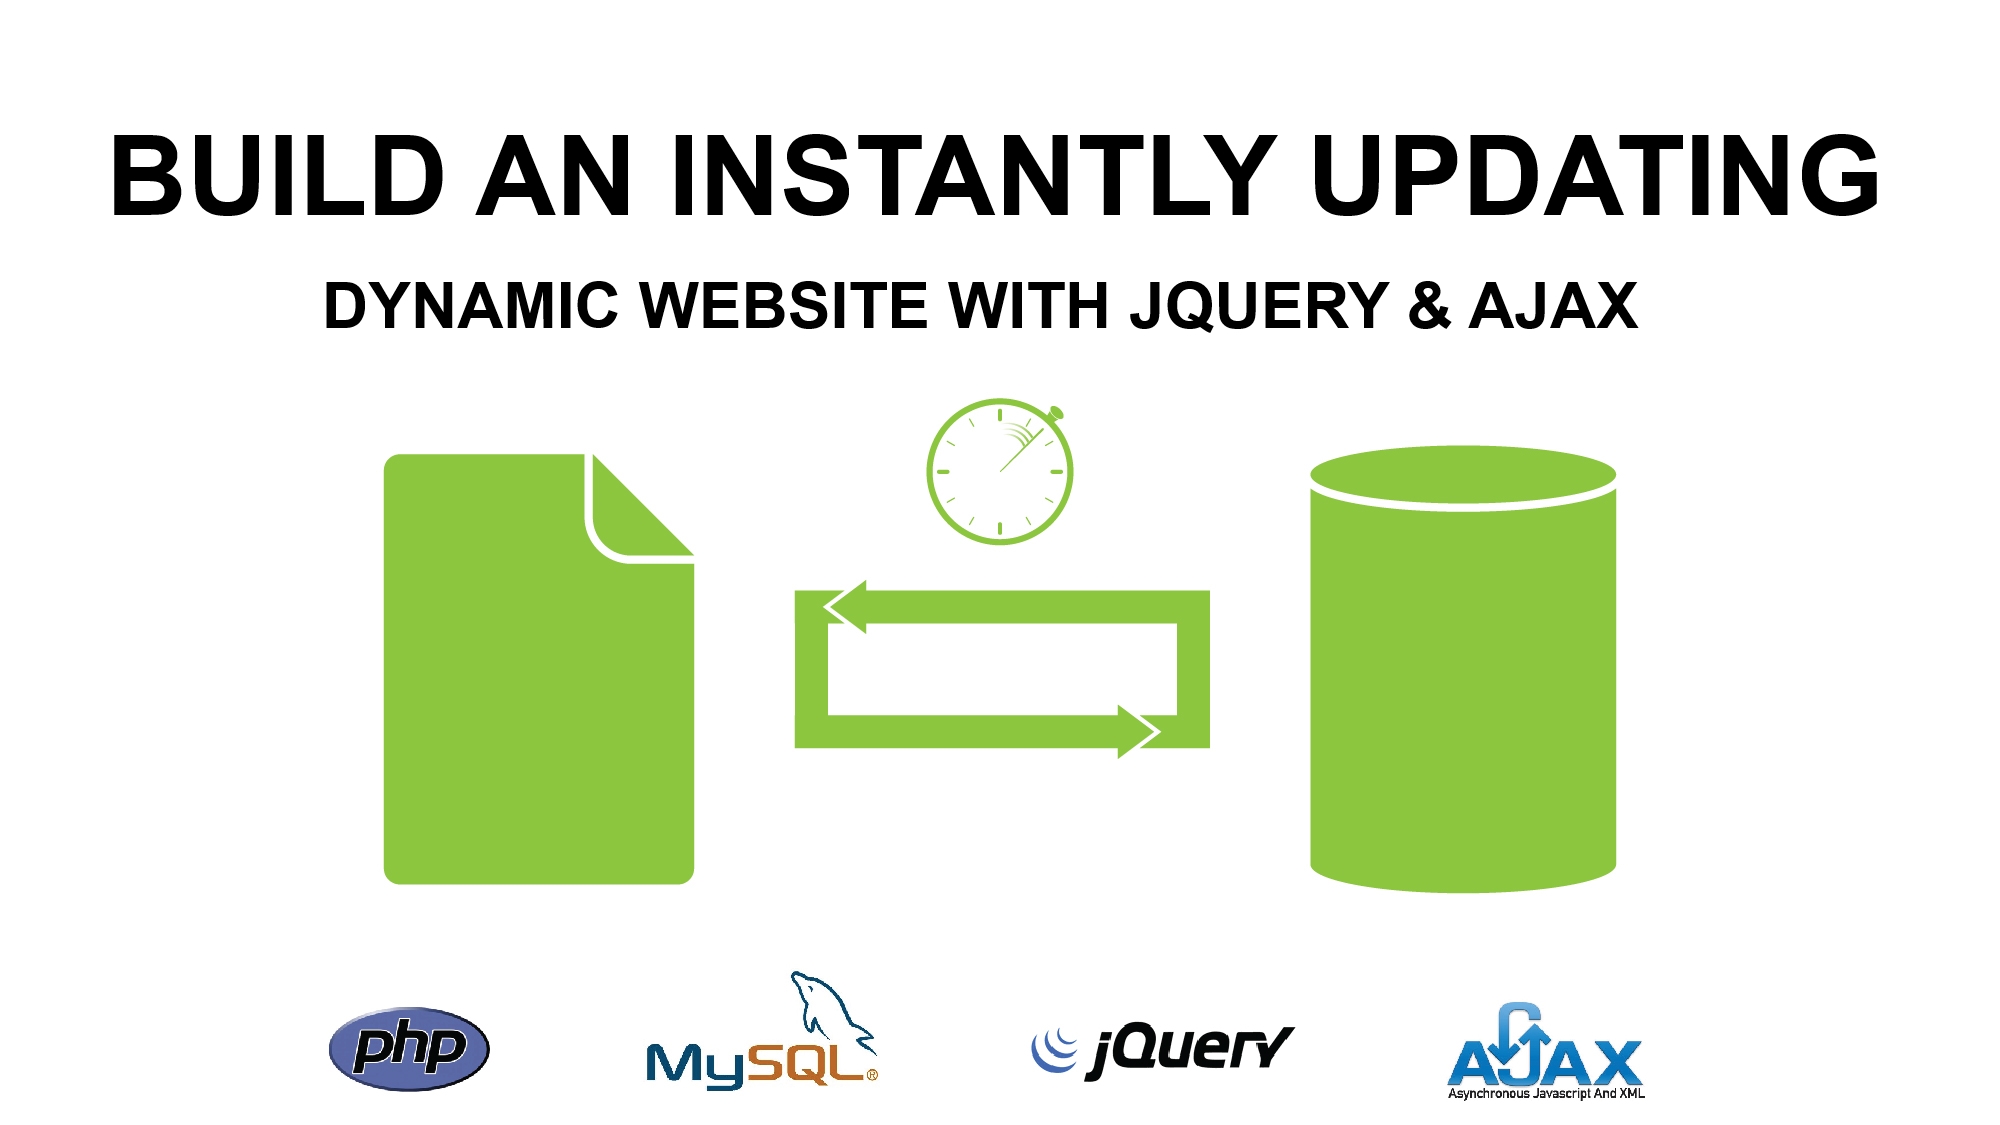 Build an instantly updating dynamic website with jQuery & AJAX